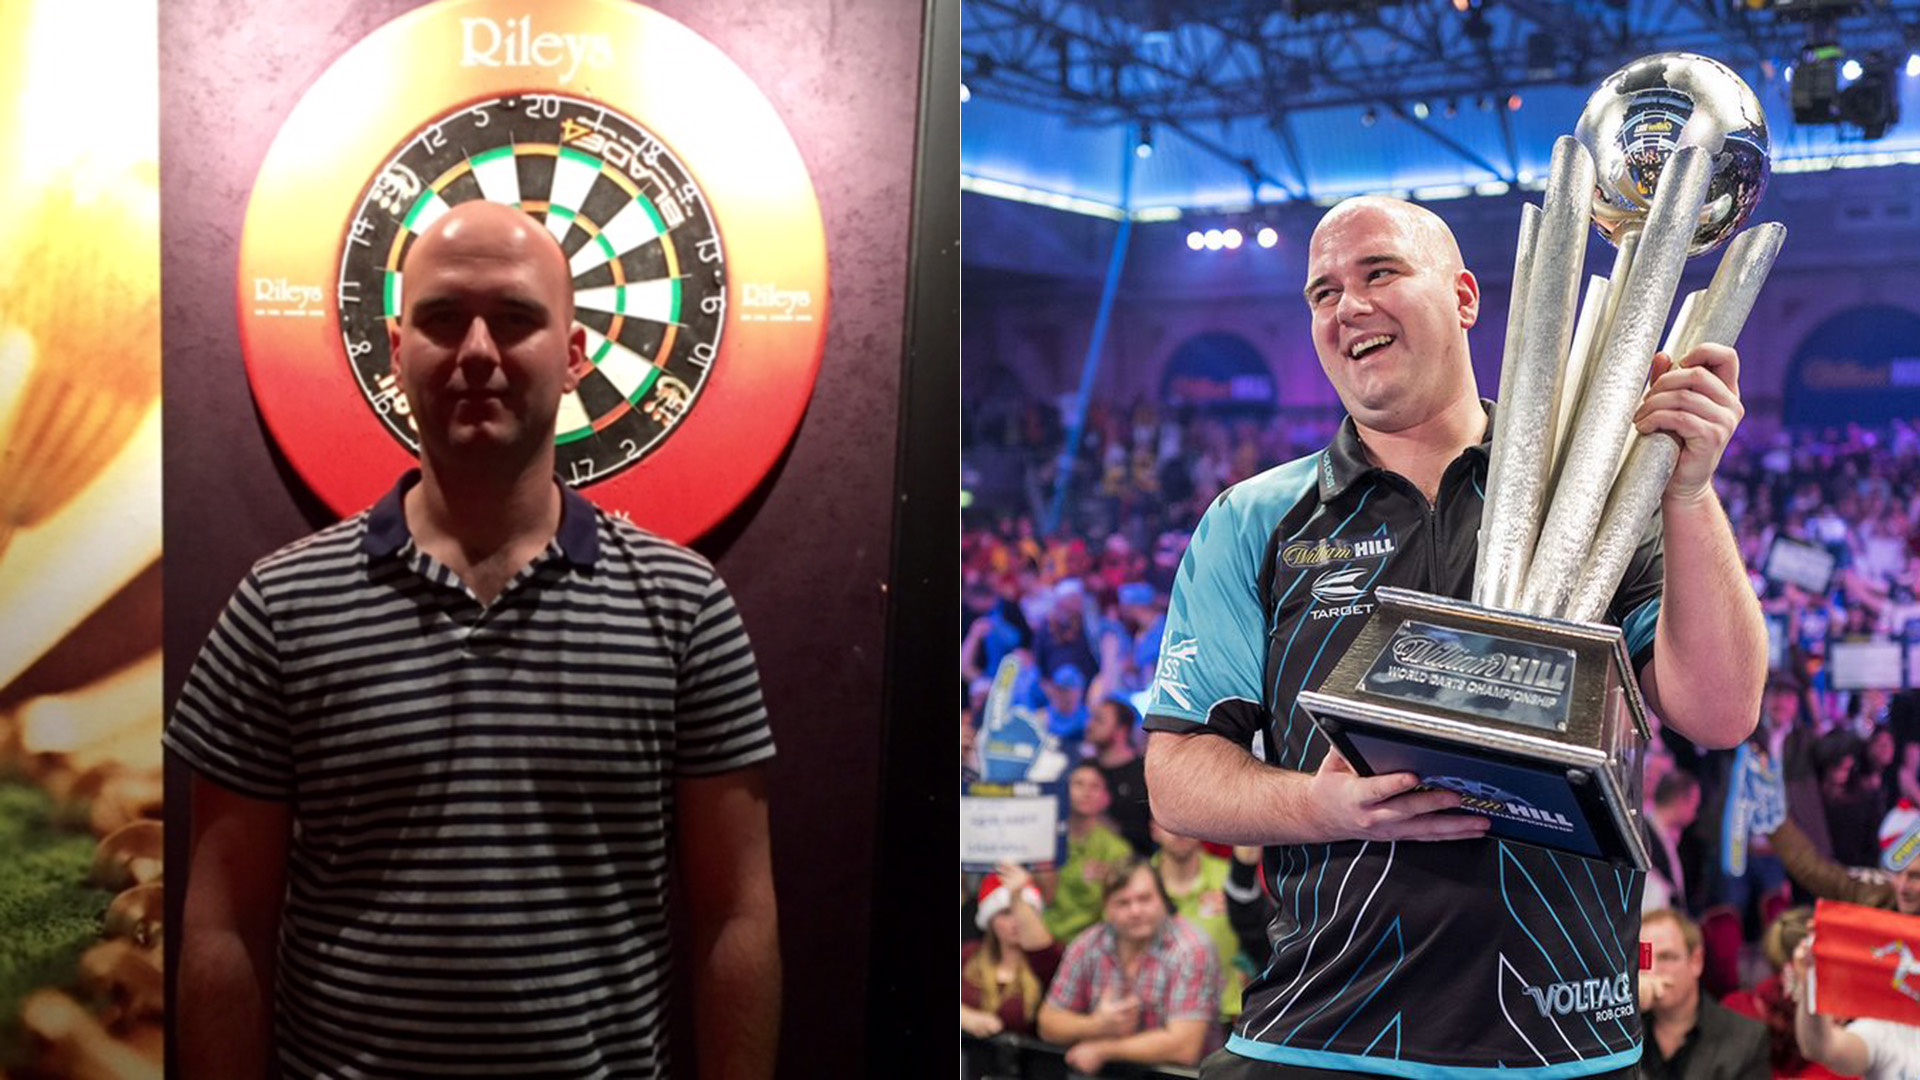 UK Open Amateur darts players planning their quest to emulate the rise of Rob Cross for £10